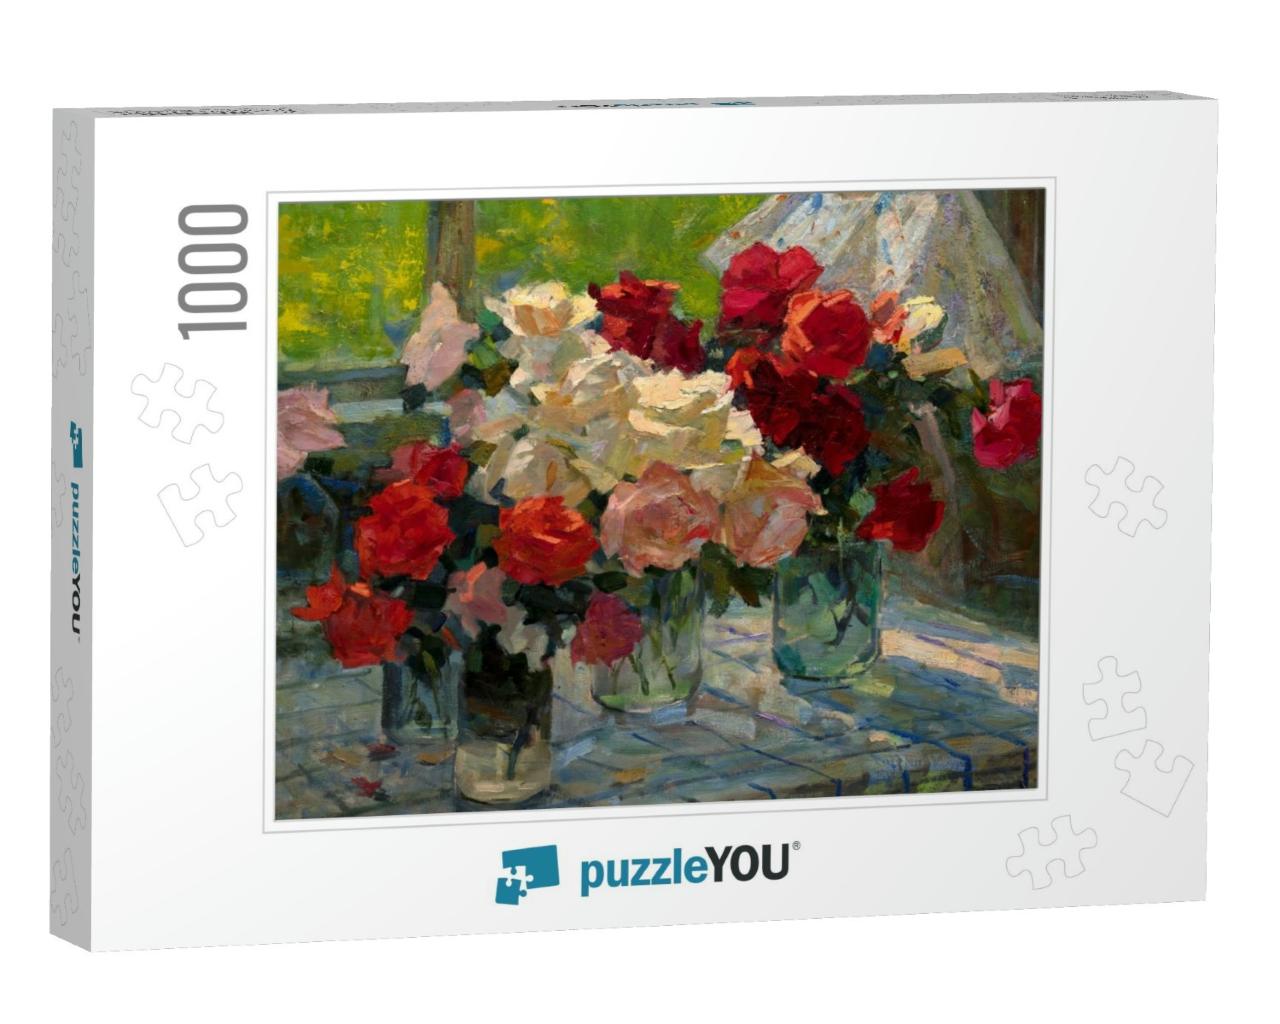 Oil Painting, Still Life... Jigsaw Puzzle with 1000 pieces